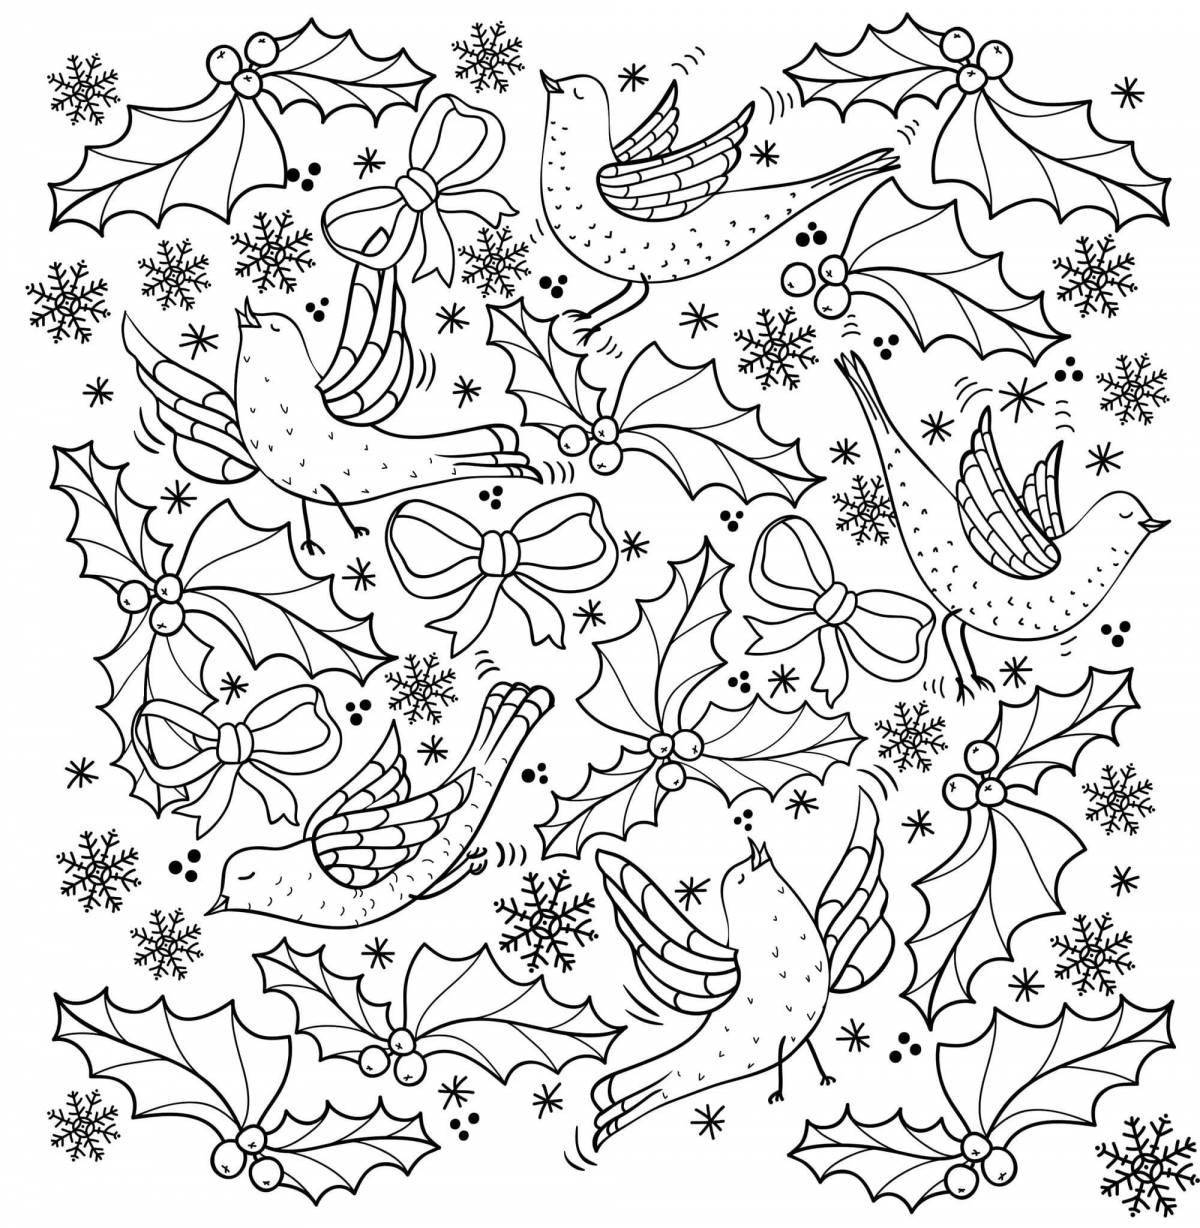 Glowing christmas coloring book for adults